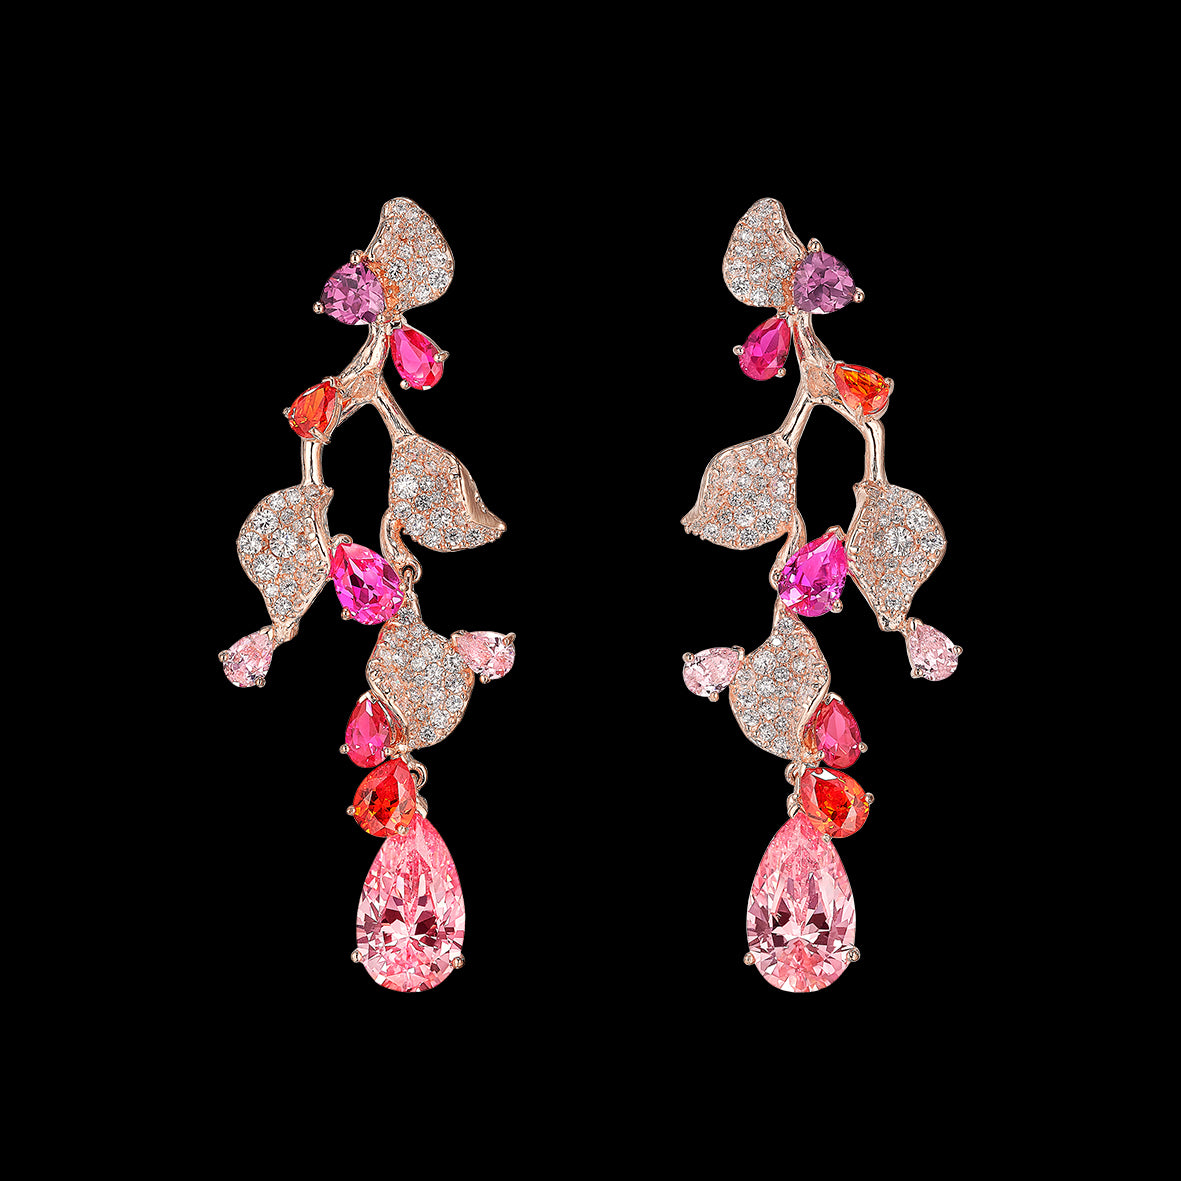 Rose Triteia Earrings, Earring, Anabela Chan Joaillerie - Fine jewelry with laboratory grown and created gemstones hand-crafted in the United Kingdom. Anabela Chan Joaillerie is the first fine jewellery brand in the world to champion laboratory-grown and created gemstones with high jewellery design, artisanal craftsmanship and a focus on ethical and sustainable innovations.